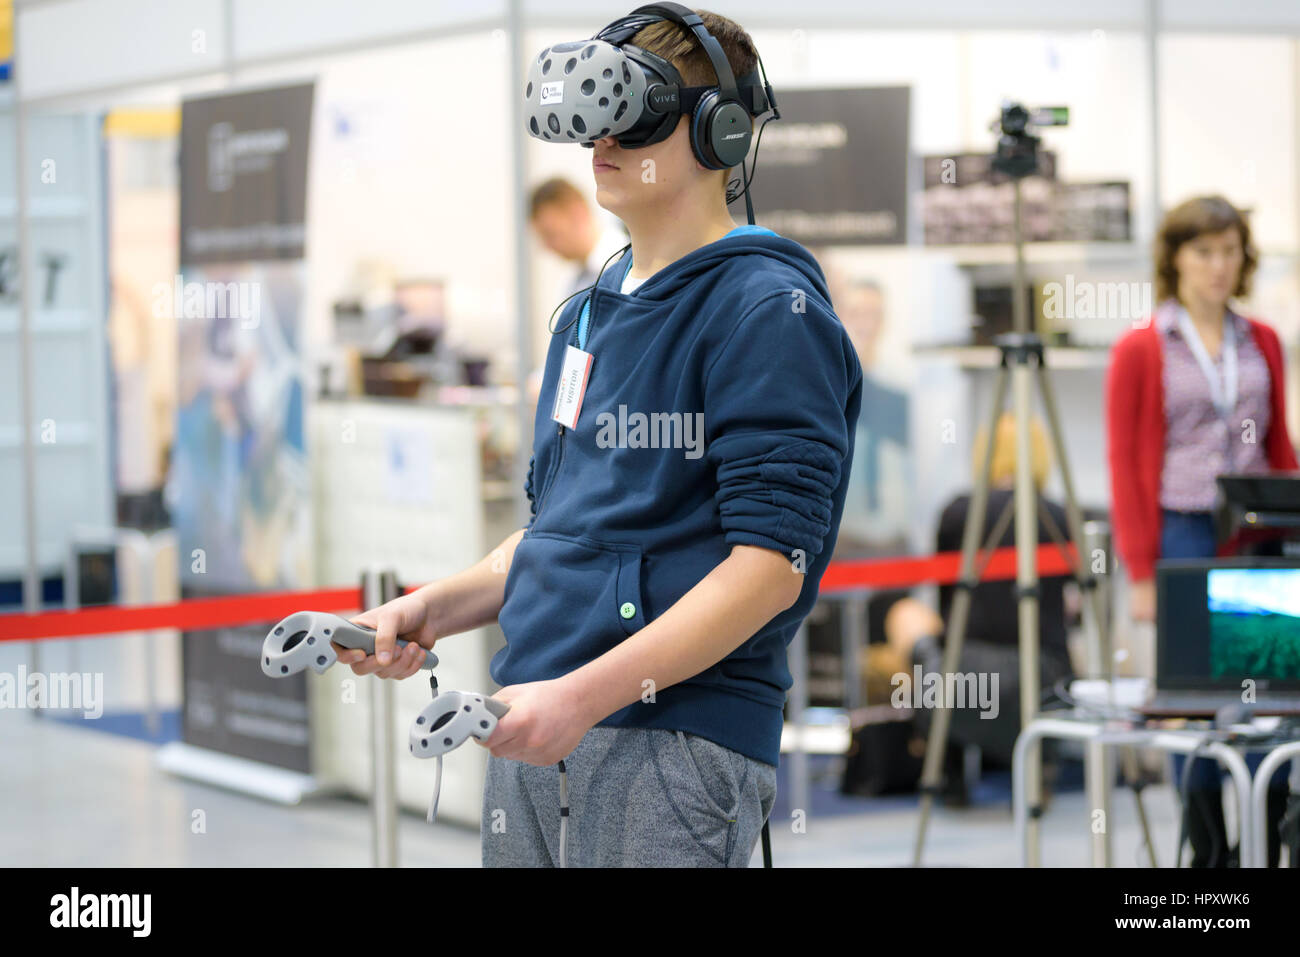 Krakow, Poland - February 23, 2017: Presentation of HTC VIVE - Virtual Reality System by 1000Realities Company during Mobile-IT Exhibition. Stock Photo